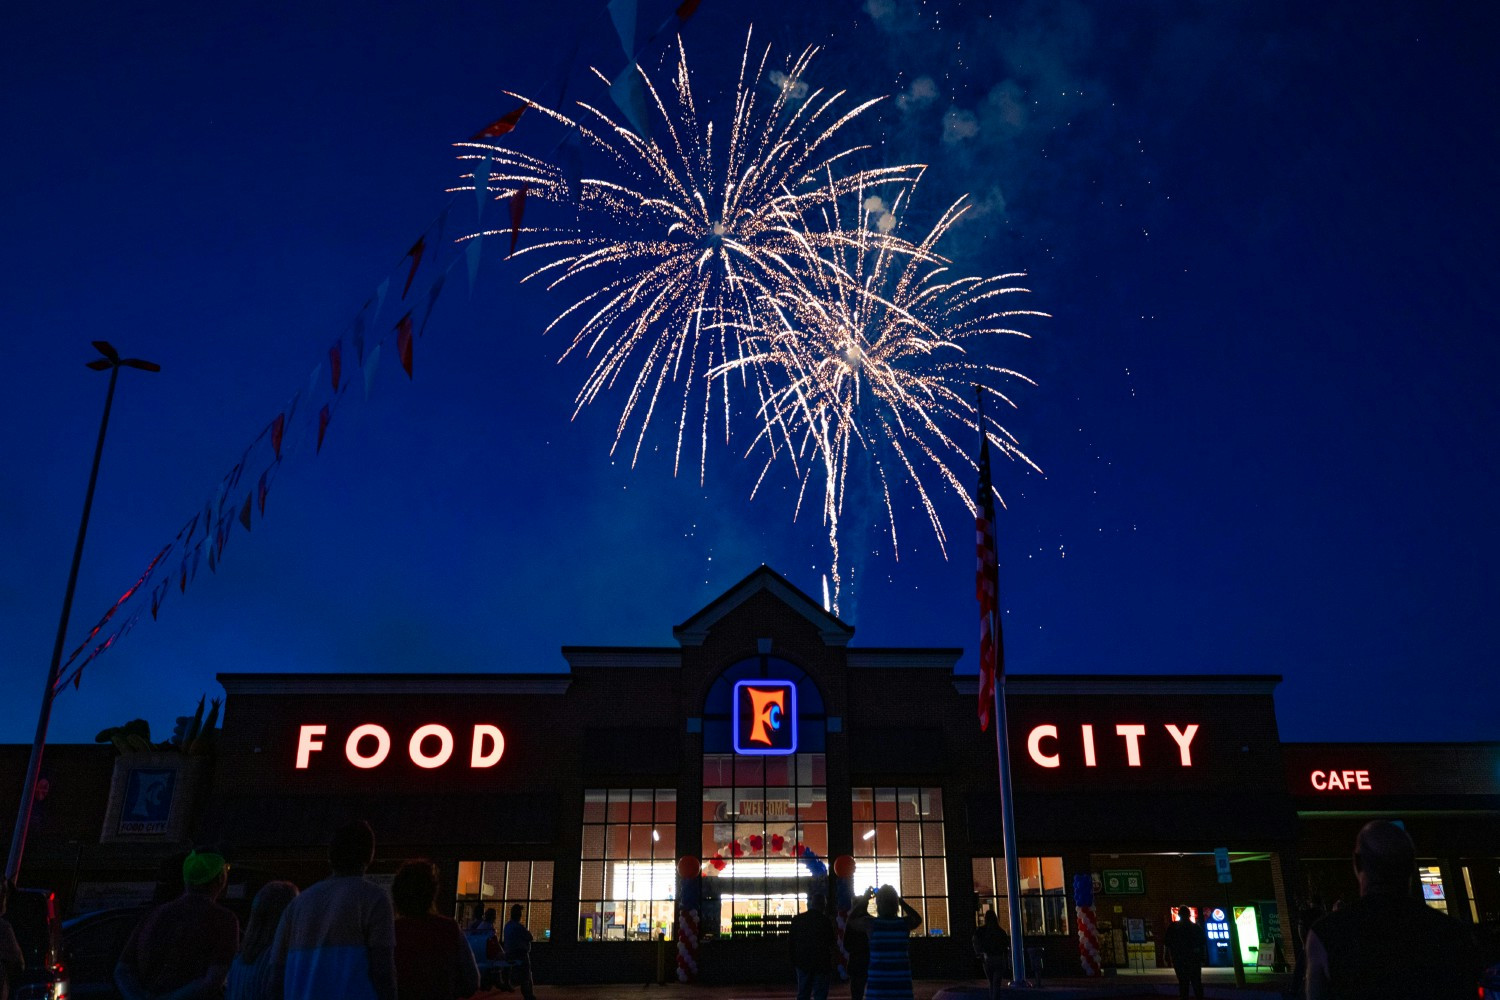 Food City hosts a spectacular community fireworks display following new store openings.